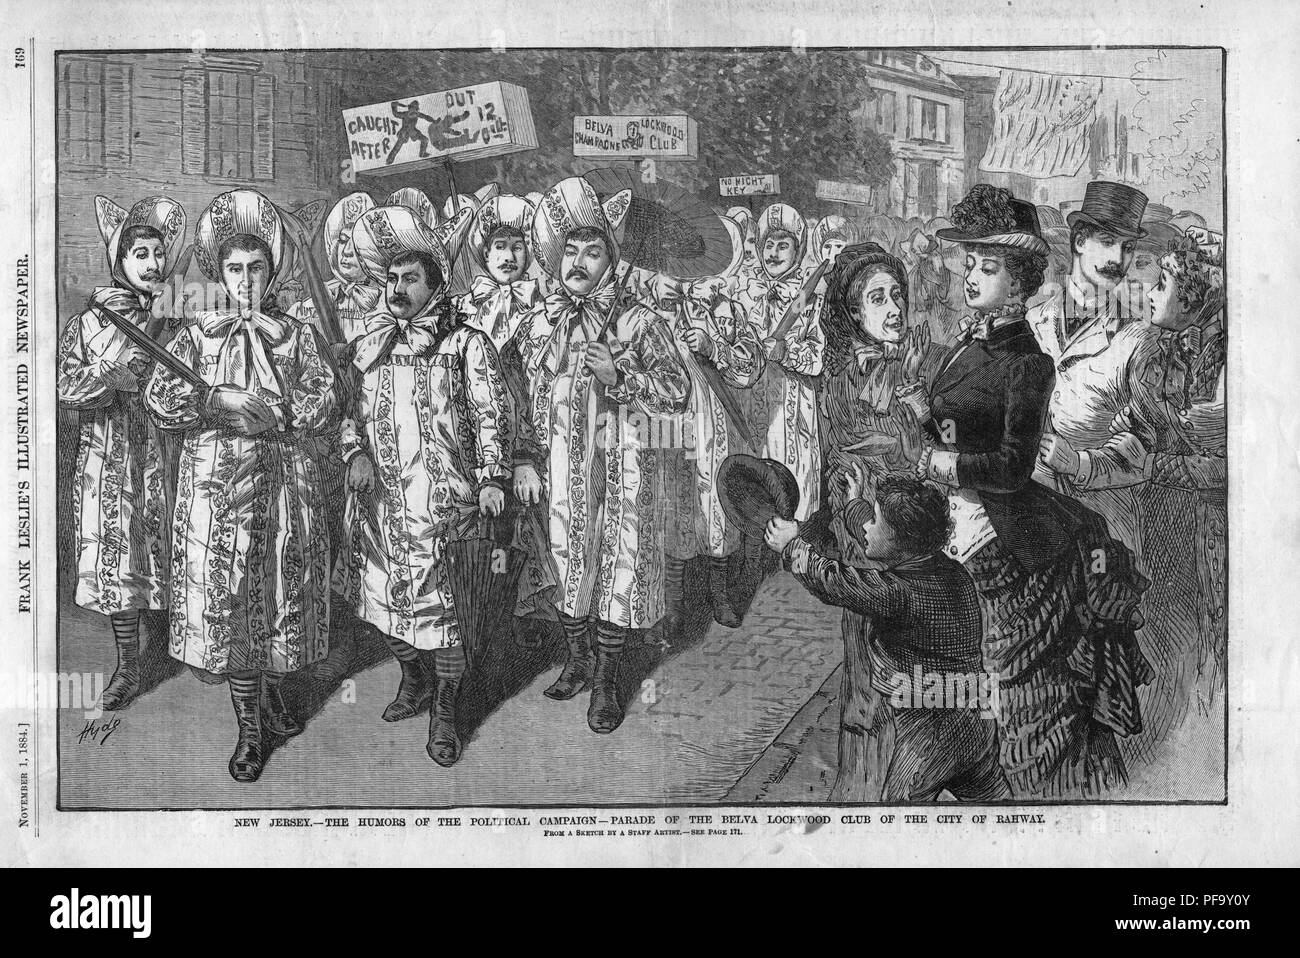 Black and white print Illustrating a satirical 'Mother Hubbard' parade in which men dressed in women's clothes and marched in the street pretending to be 'supporters' of Belva Lockwood, who ran for President in 1884 and 1888, captioned 'New Jersey - the humors of the political campaign parade of the Belva Lockwood Club of the city of Rahway, ' published by Frank Leslie's Illustrated Newspaper for the American market, 1884. () Stock Photo